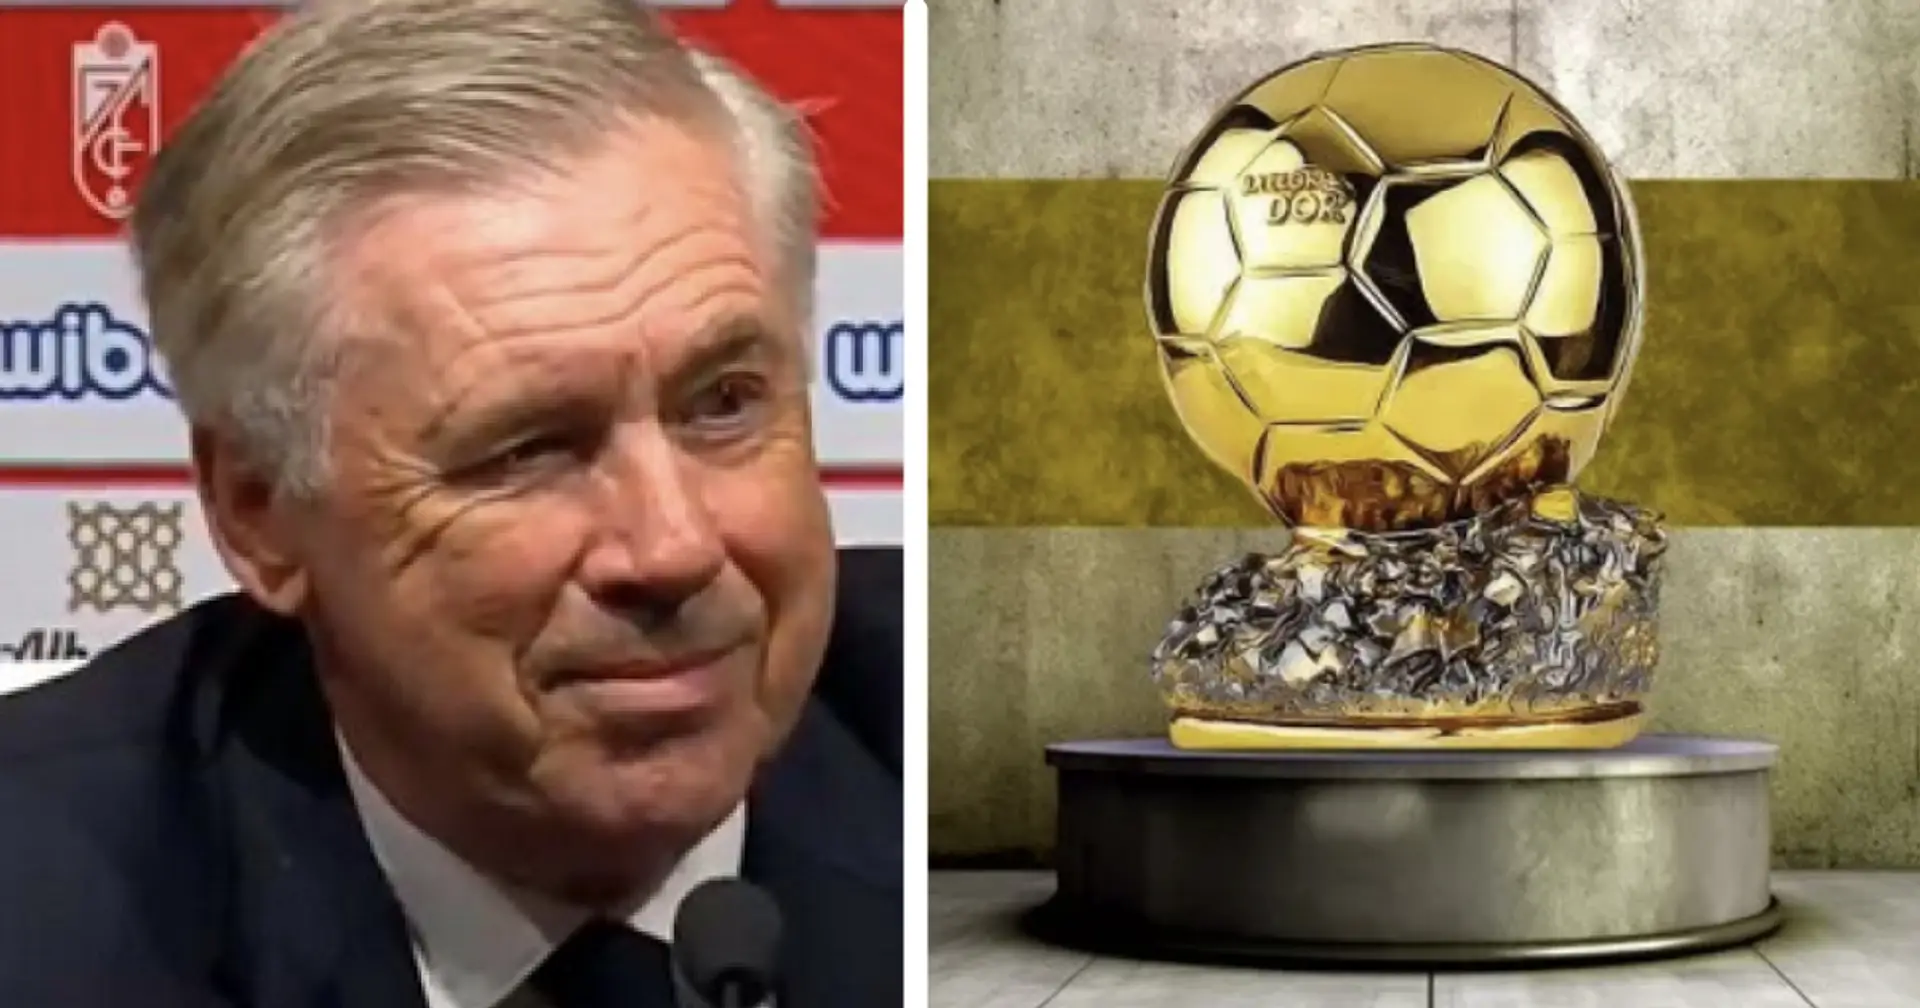 Carlo Ancelotti names one under-radar Real Madrid player he'd like to win Ballon d'Or